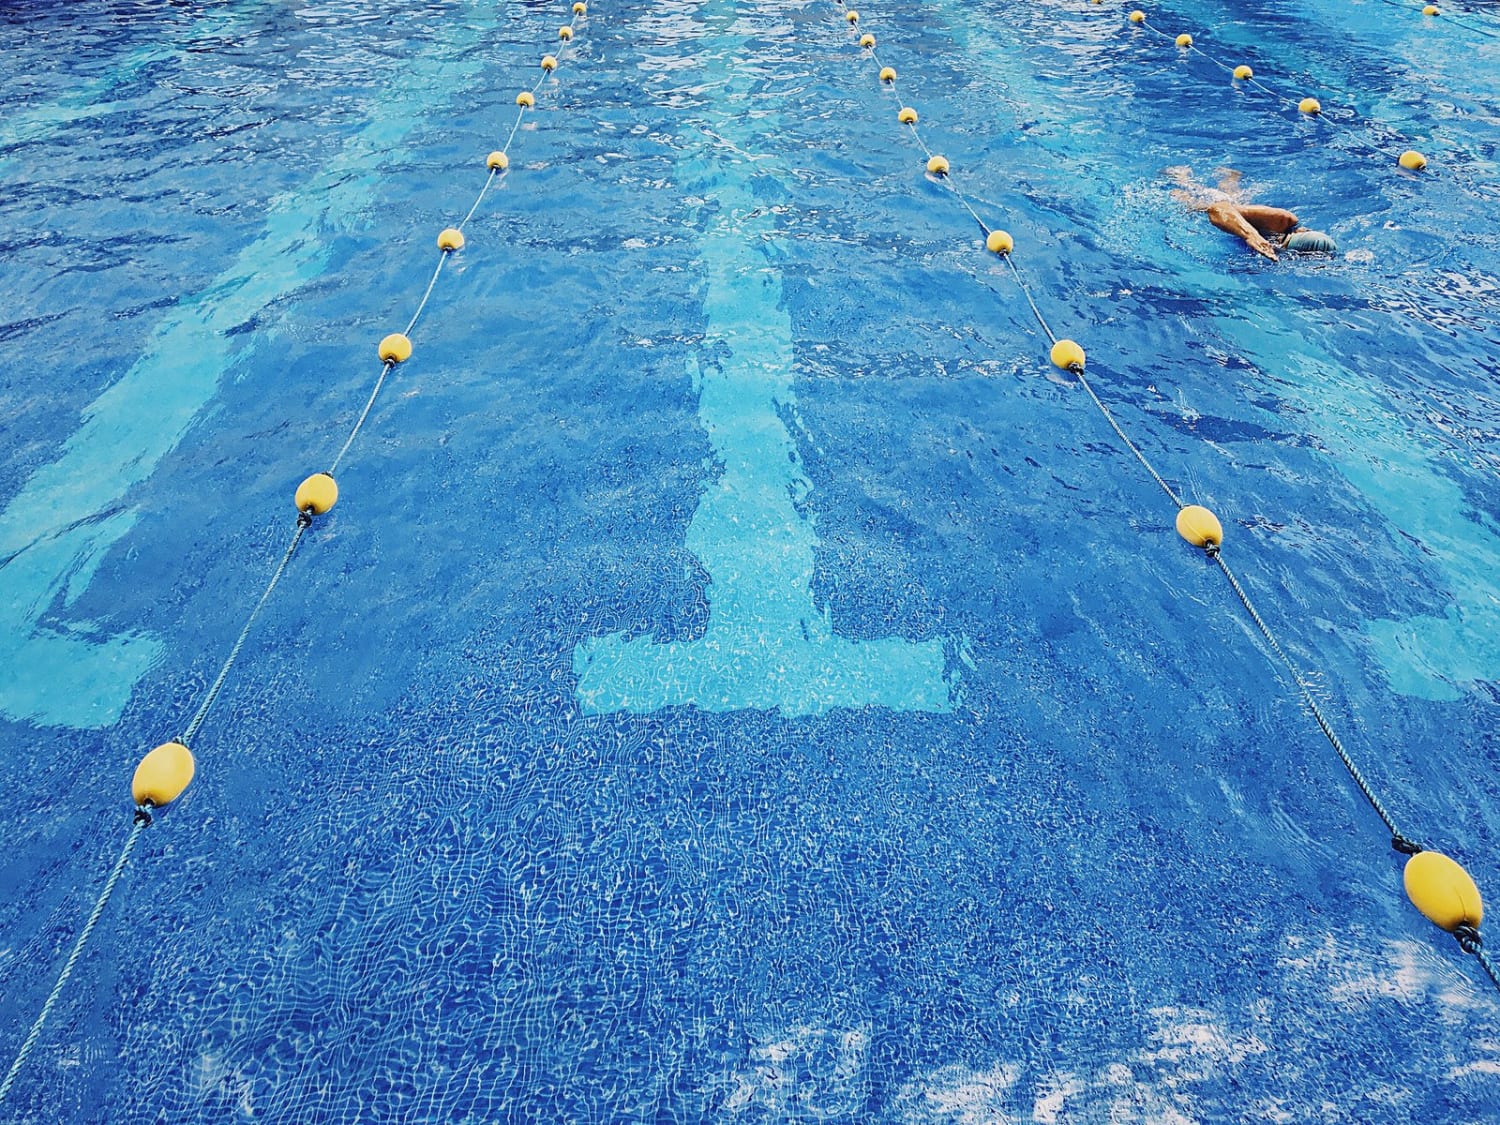 Scientists Found a Sweet New Way to Measure Pee in Pools